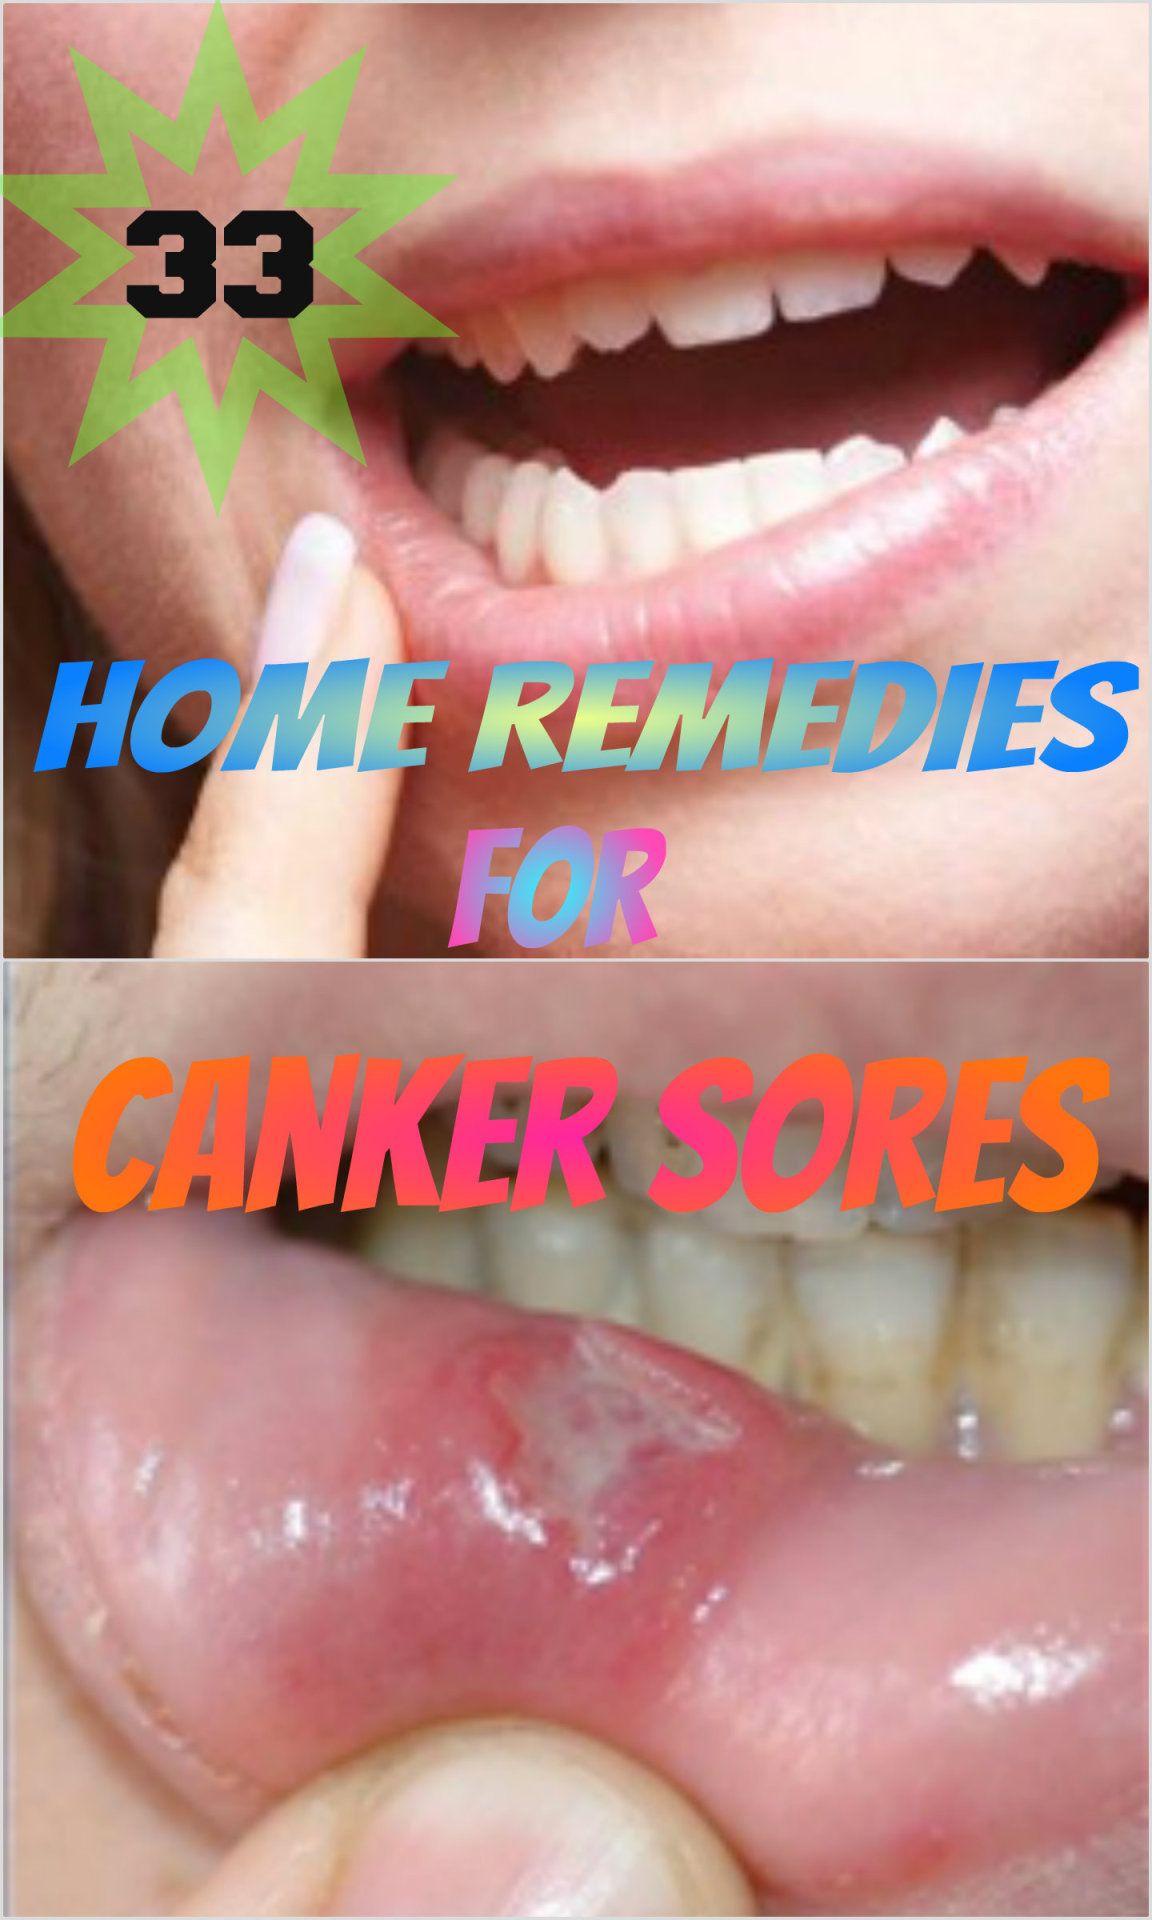 Home Remedies Store • 33 Home Remedies for Canker Sores